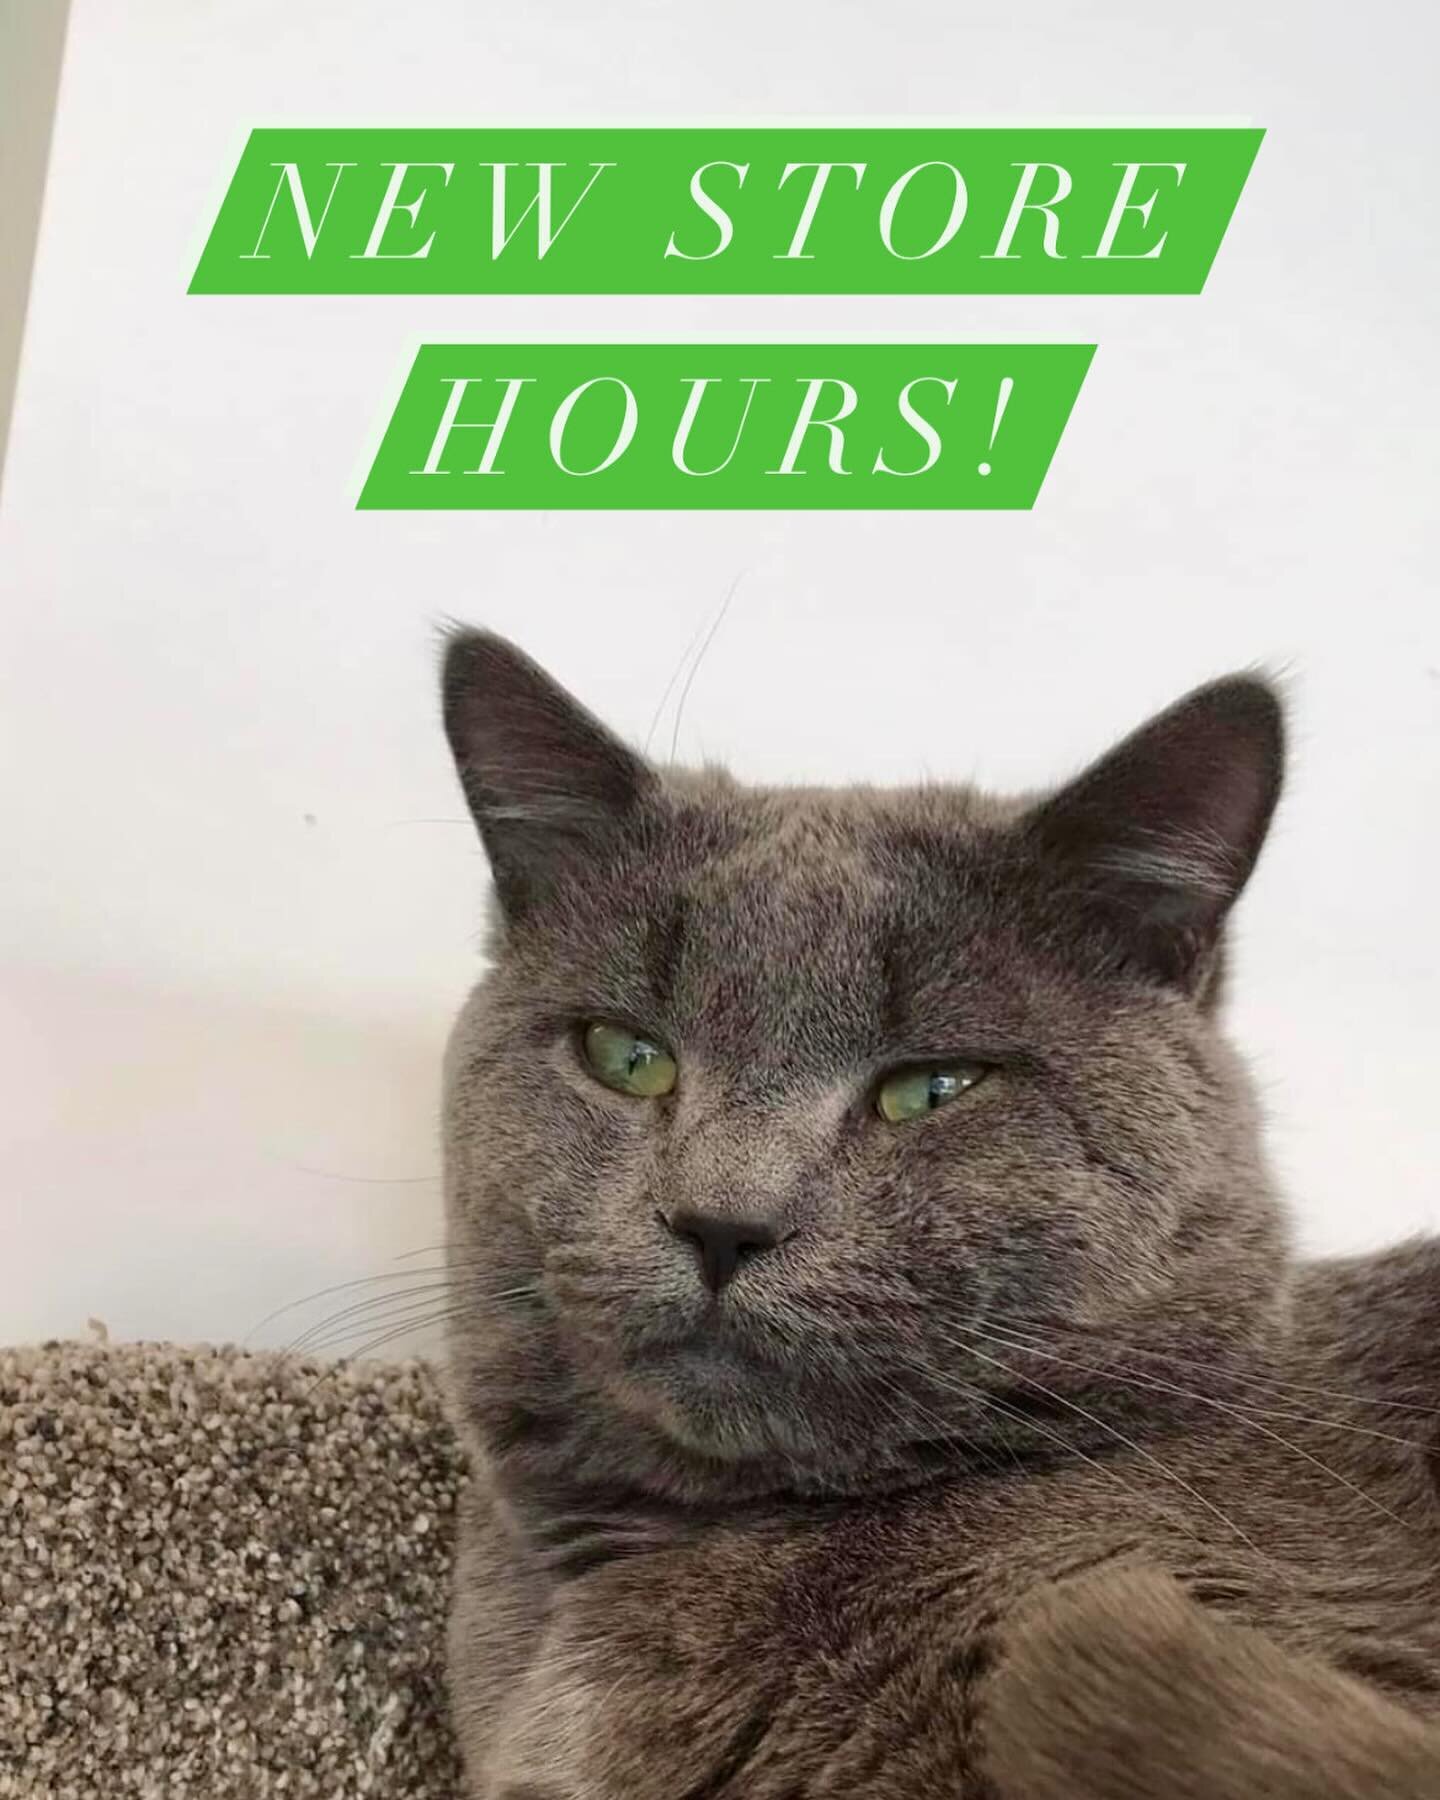 Starting April 1st, we will have new store hours! ⬇️

Monday-Friday: 9am-9pm 
Kitty Visits running from 9:30am-9pm

Saturday-Sunday: 8am-9pm 
Kitty Visits running from 9am-9pm, with a break for the kitties to eat dinner from 5-5:30pm

We&rsquo;ll see